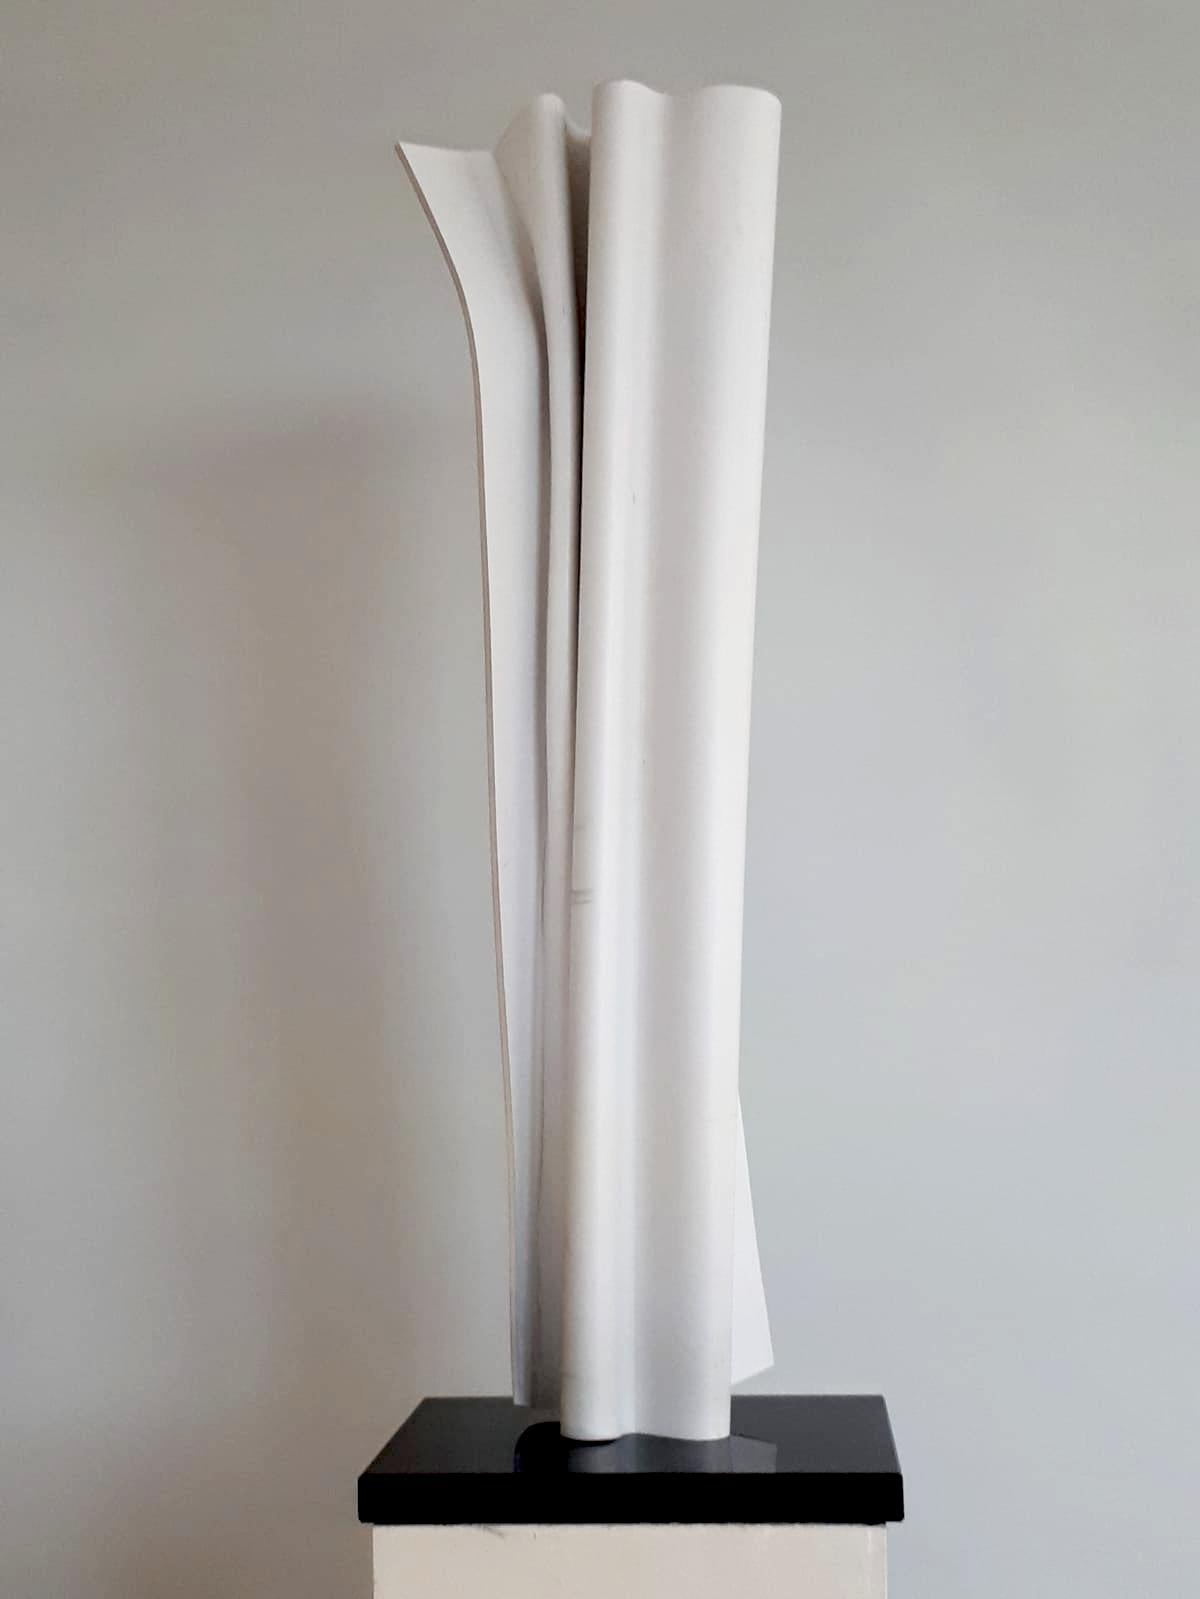 This beautiful large white sculpture can be used for indoor or outdoors. It is lacquered in a stunning white and makes for an elegant statement in any garden, lobby or private home.

Artist: Kuno Vollet
Size: 98 x 30 x 15 cm

About the